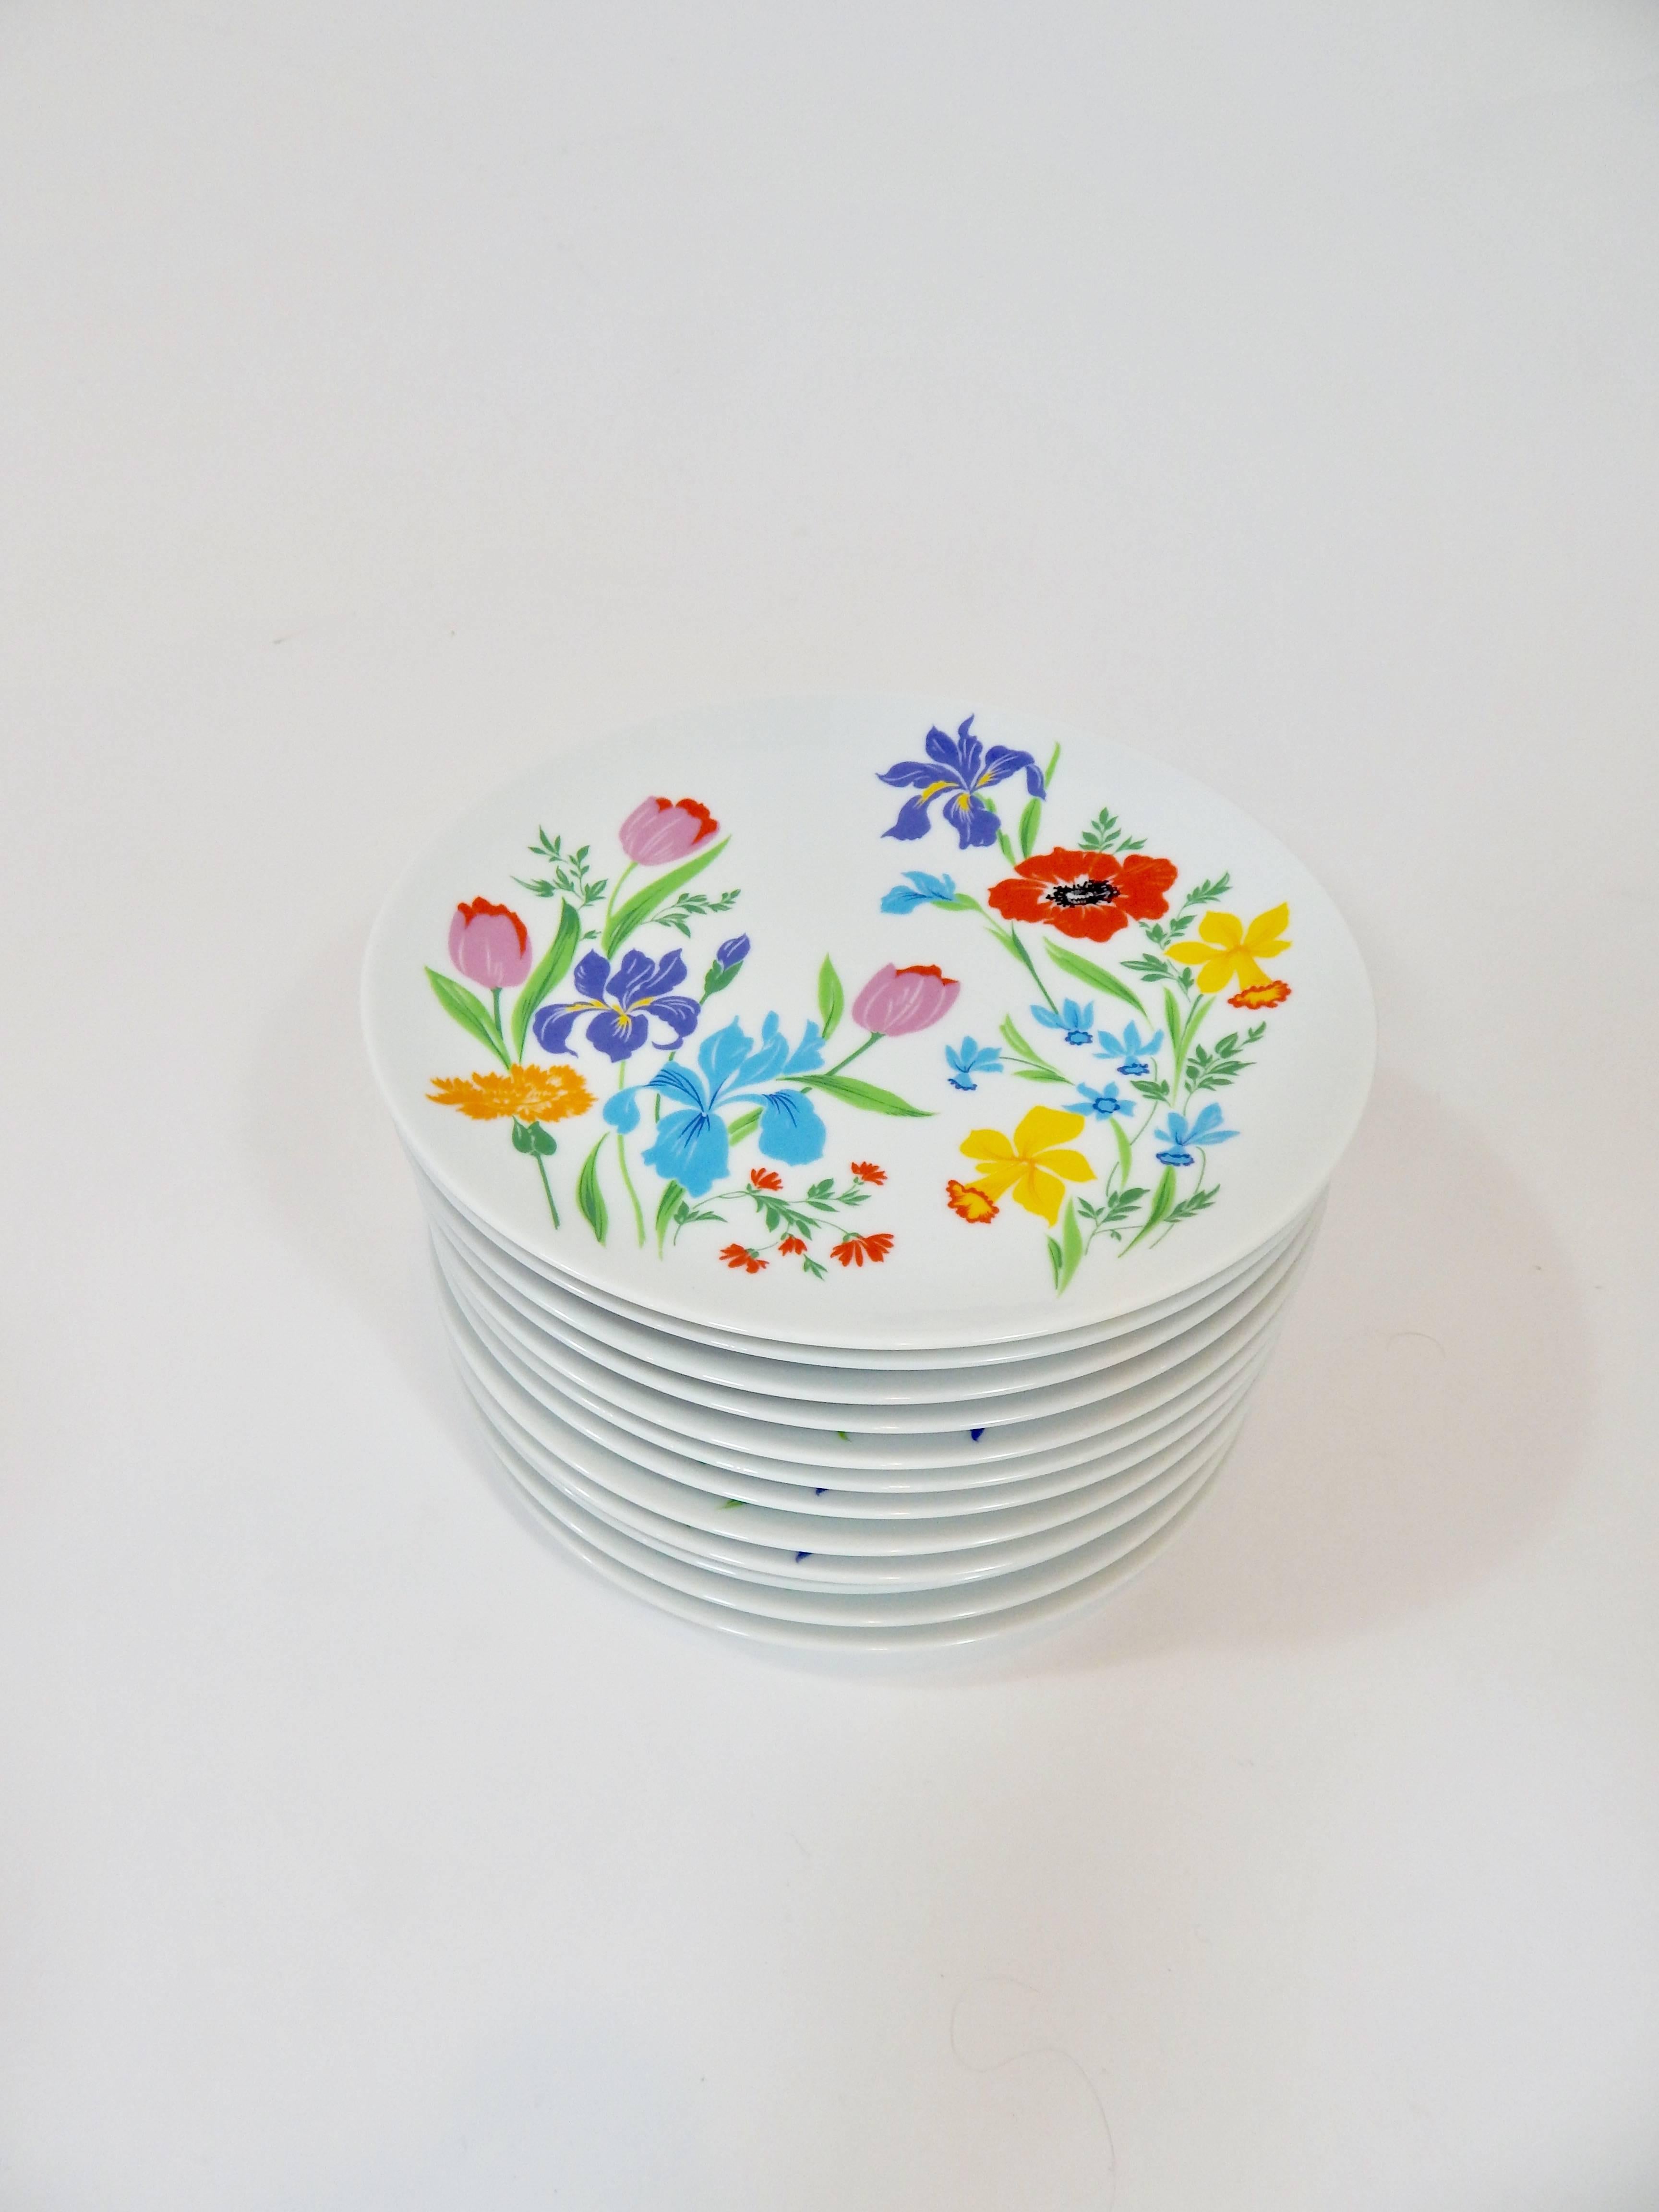 Set of 12 Porcelain 10 inch plates. Bright multicolored floral Primavera pattern. All plates are marked. Made by Heinrich Germany. Excellent Condition 